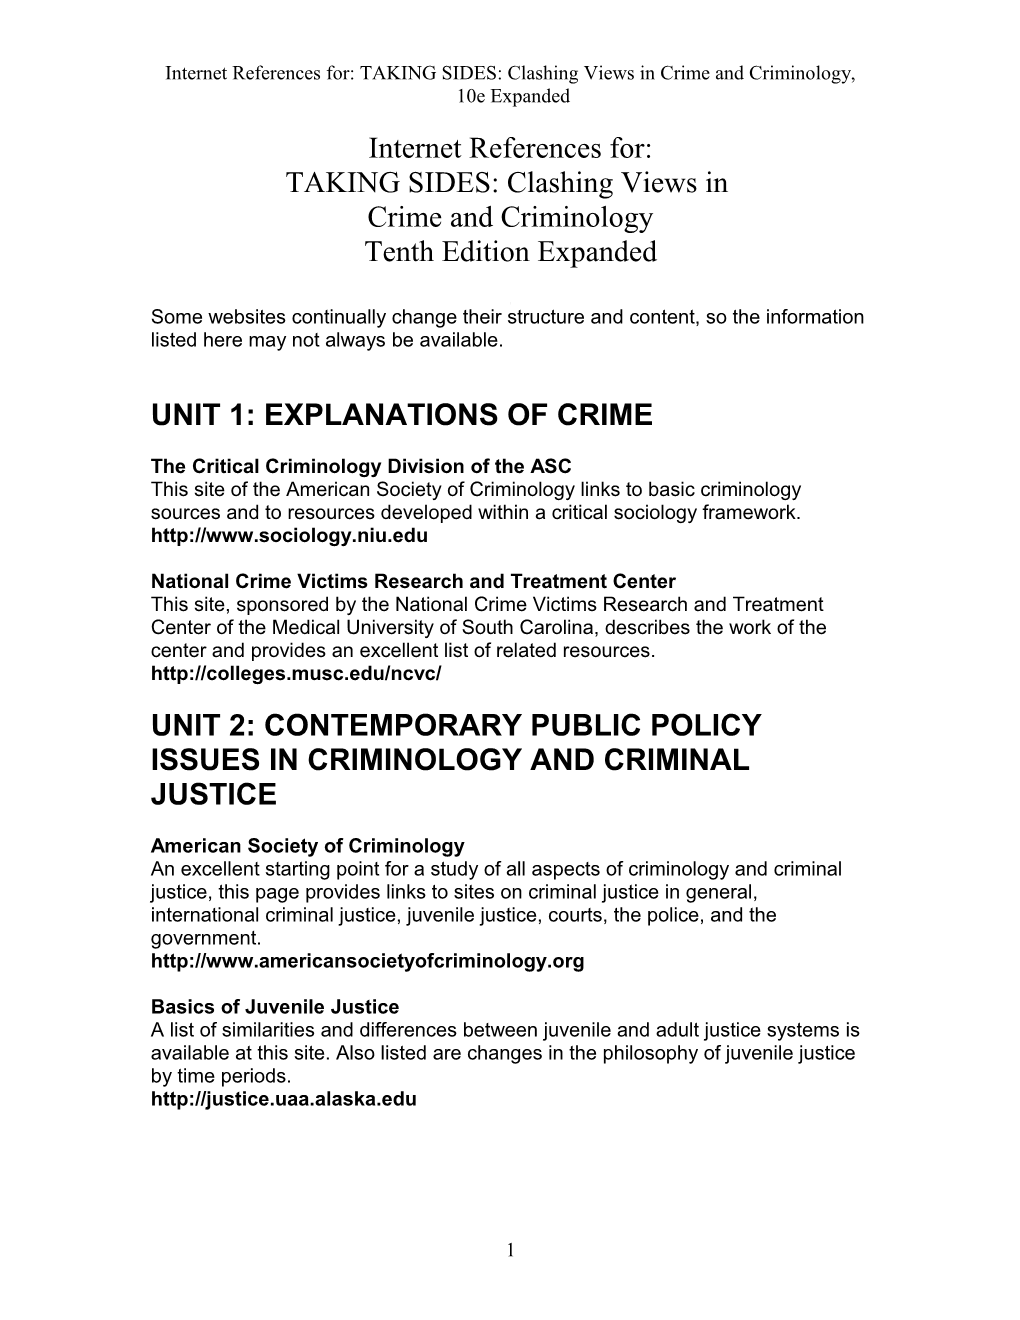 Internet References For:TAKING SIDES: Clashing Views in Crime and Criminology